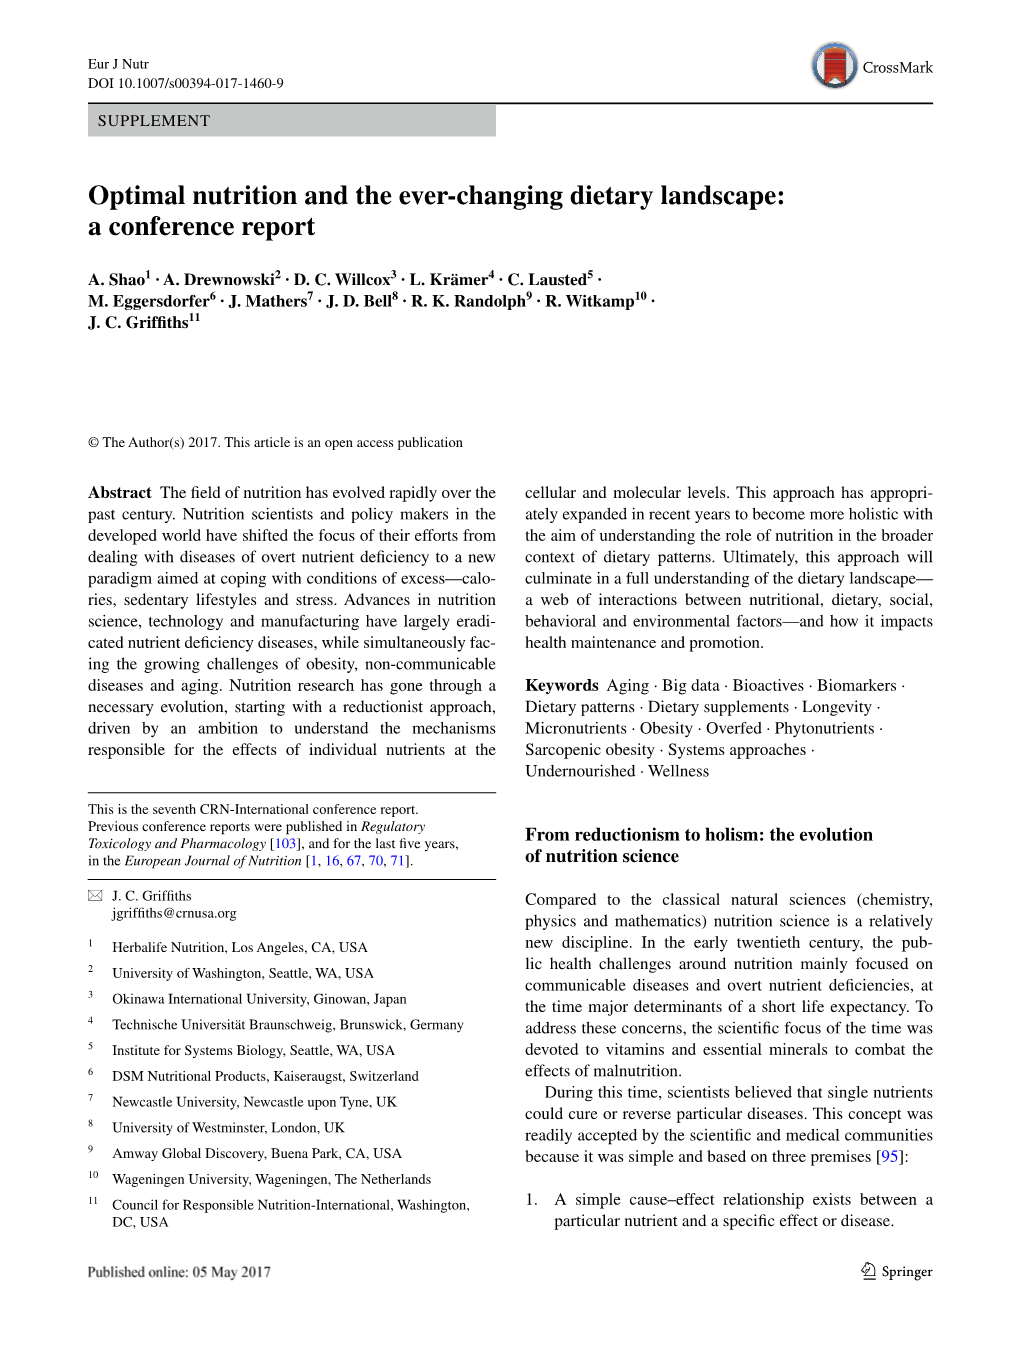 Optimal Nutrition and the Ever-Changing Dietary Landscape’ Held on December 2, 2016, in Hamburg, Germany